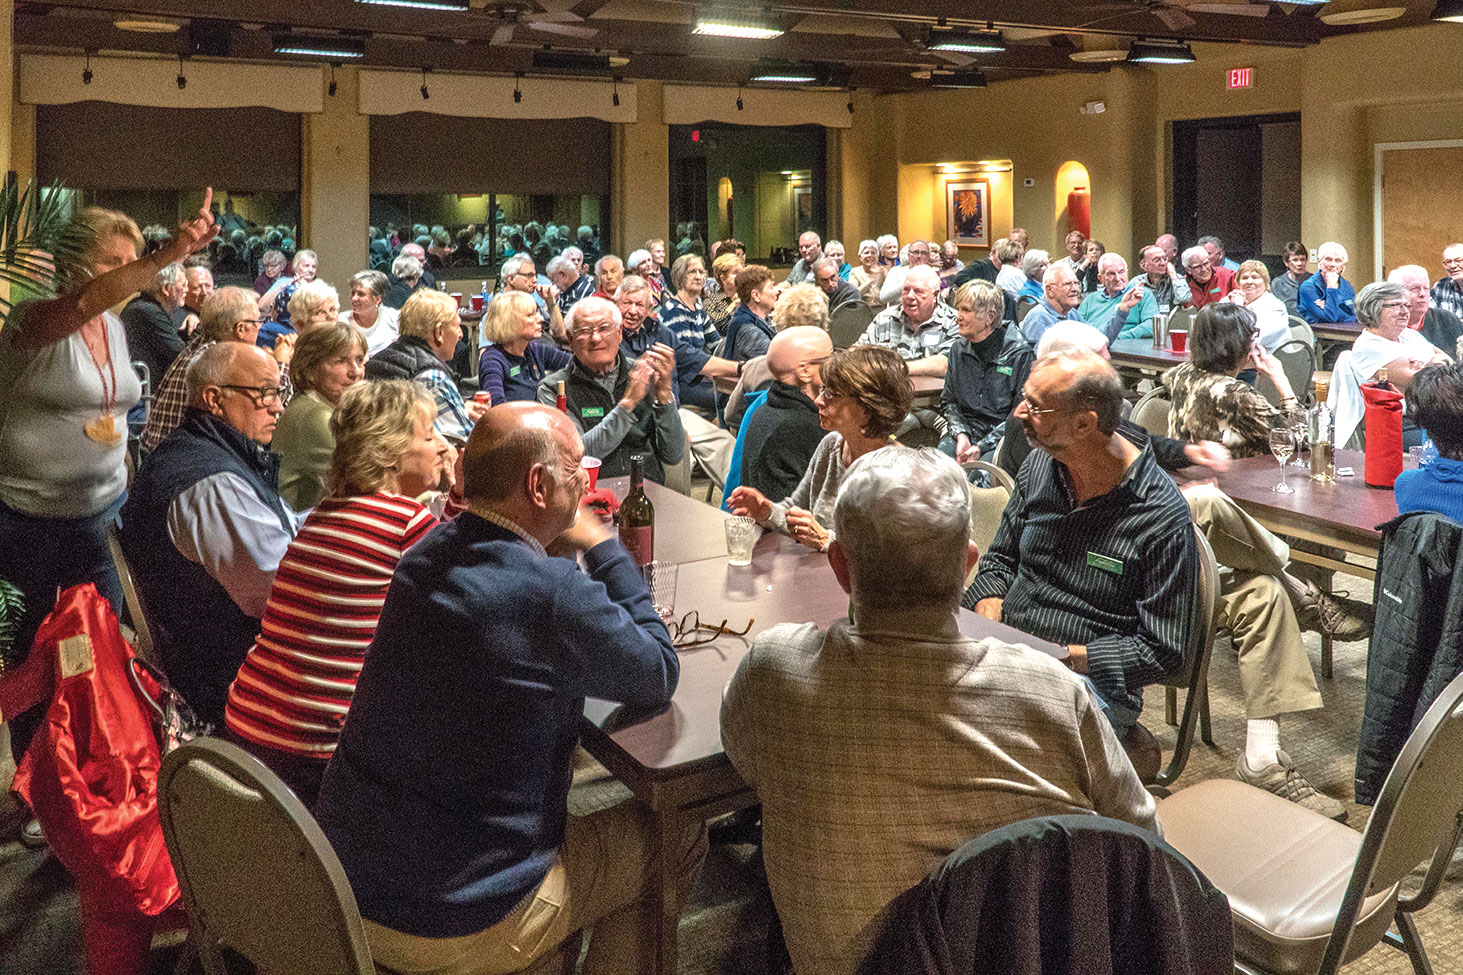 Over 90 Unit 21 residents turned out for the unit’s Annual Meeting.